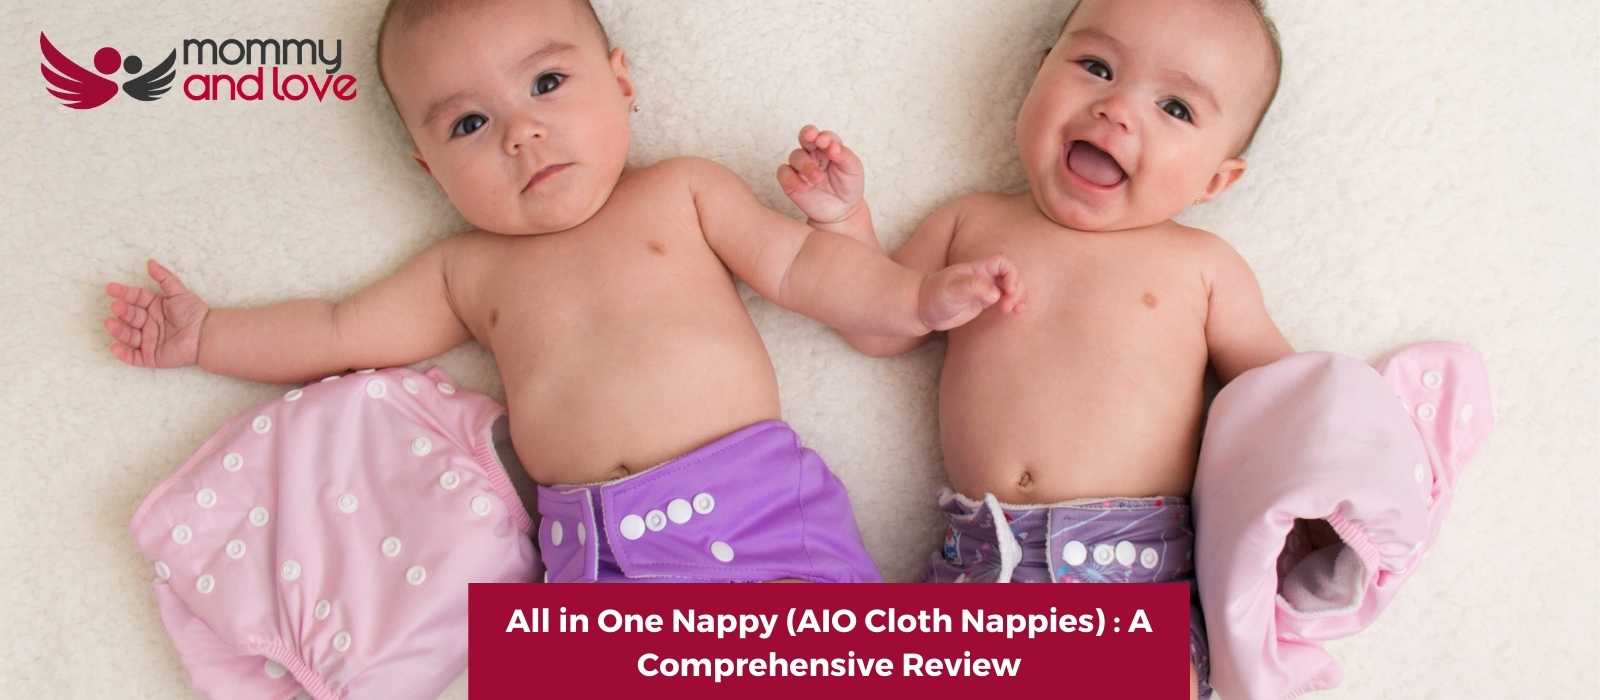 All in One Nappy (AIO Cloth Nappies) A Comprehensive Review